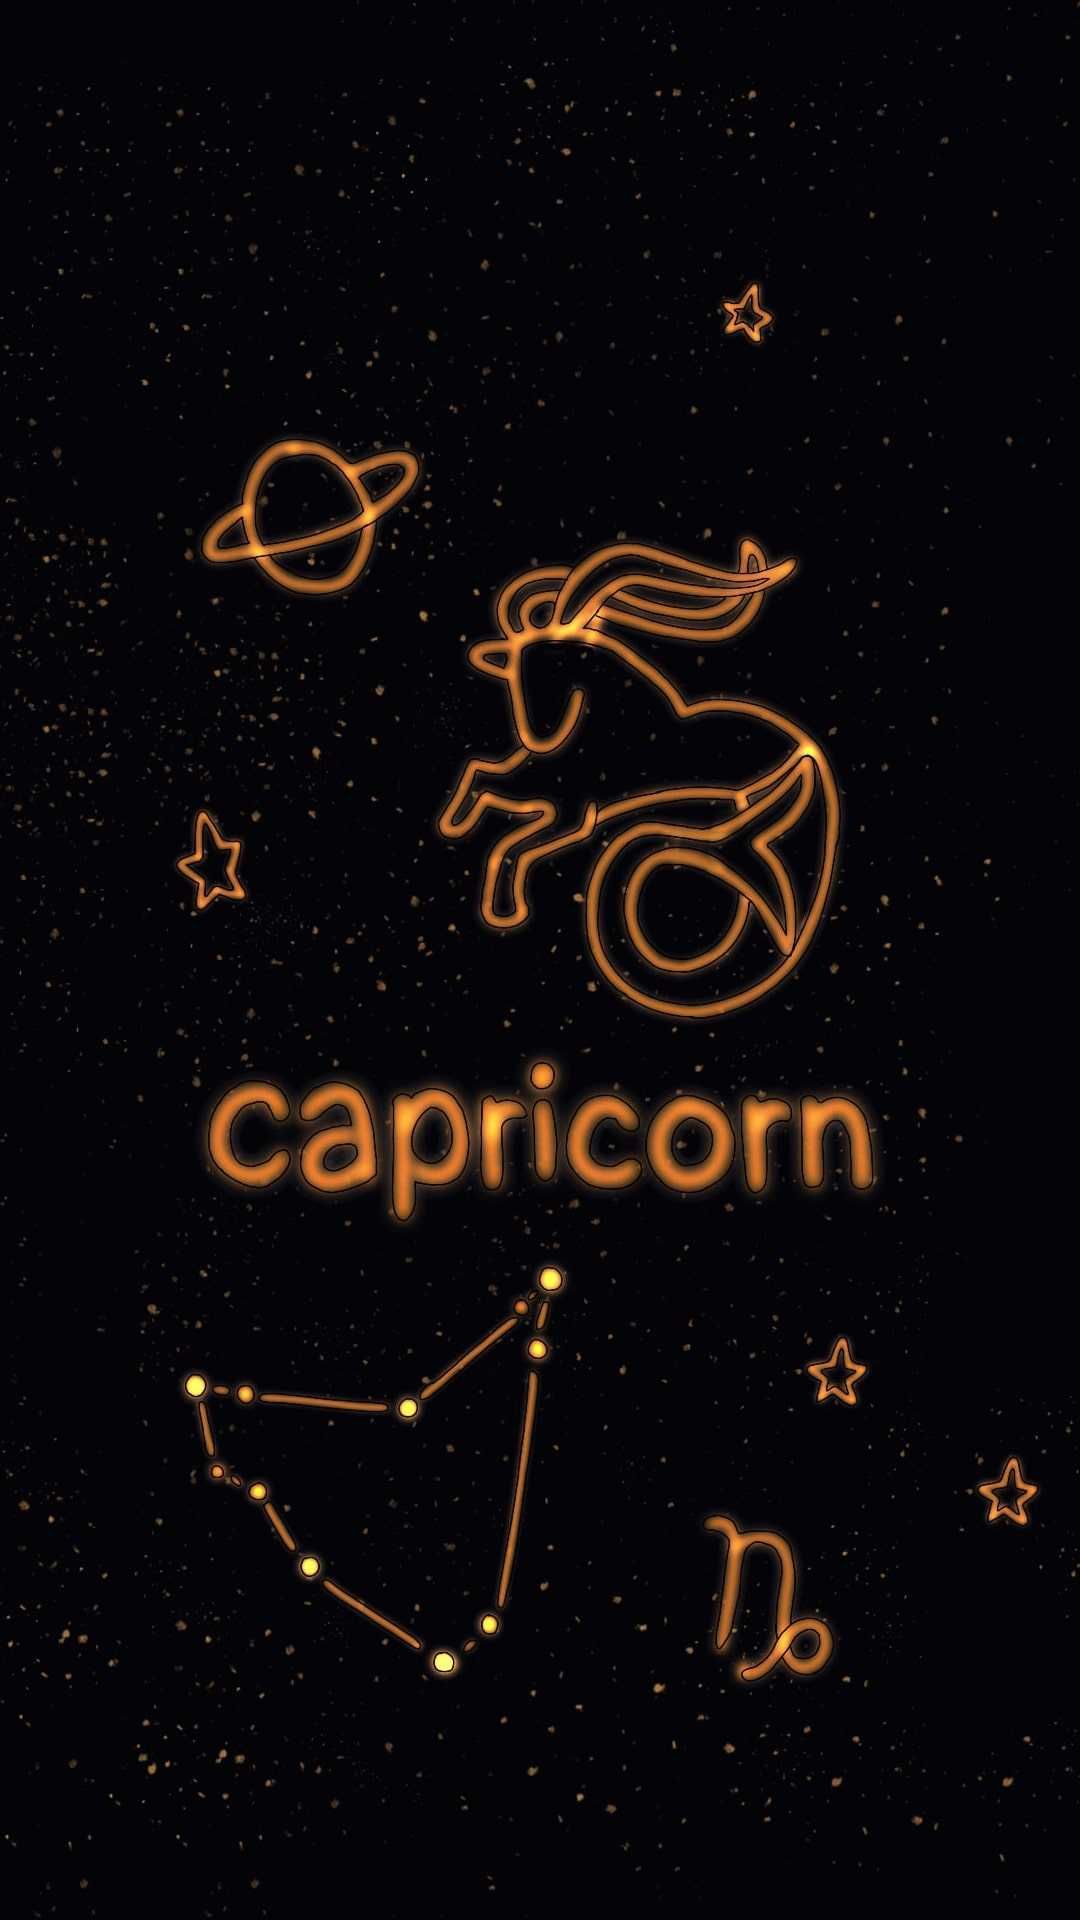 Capricorn Wallpaper Discover more Astrological Sign, Astrology, Astronomy, Capricorn, Capri. Capricorn aesthetic, Zodiac capricorn, Capricorn constellation tattoo